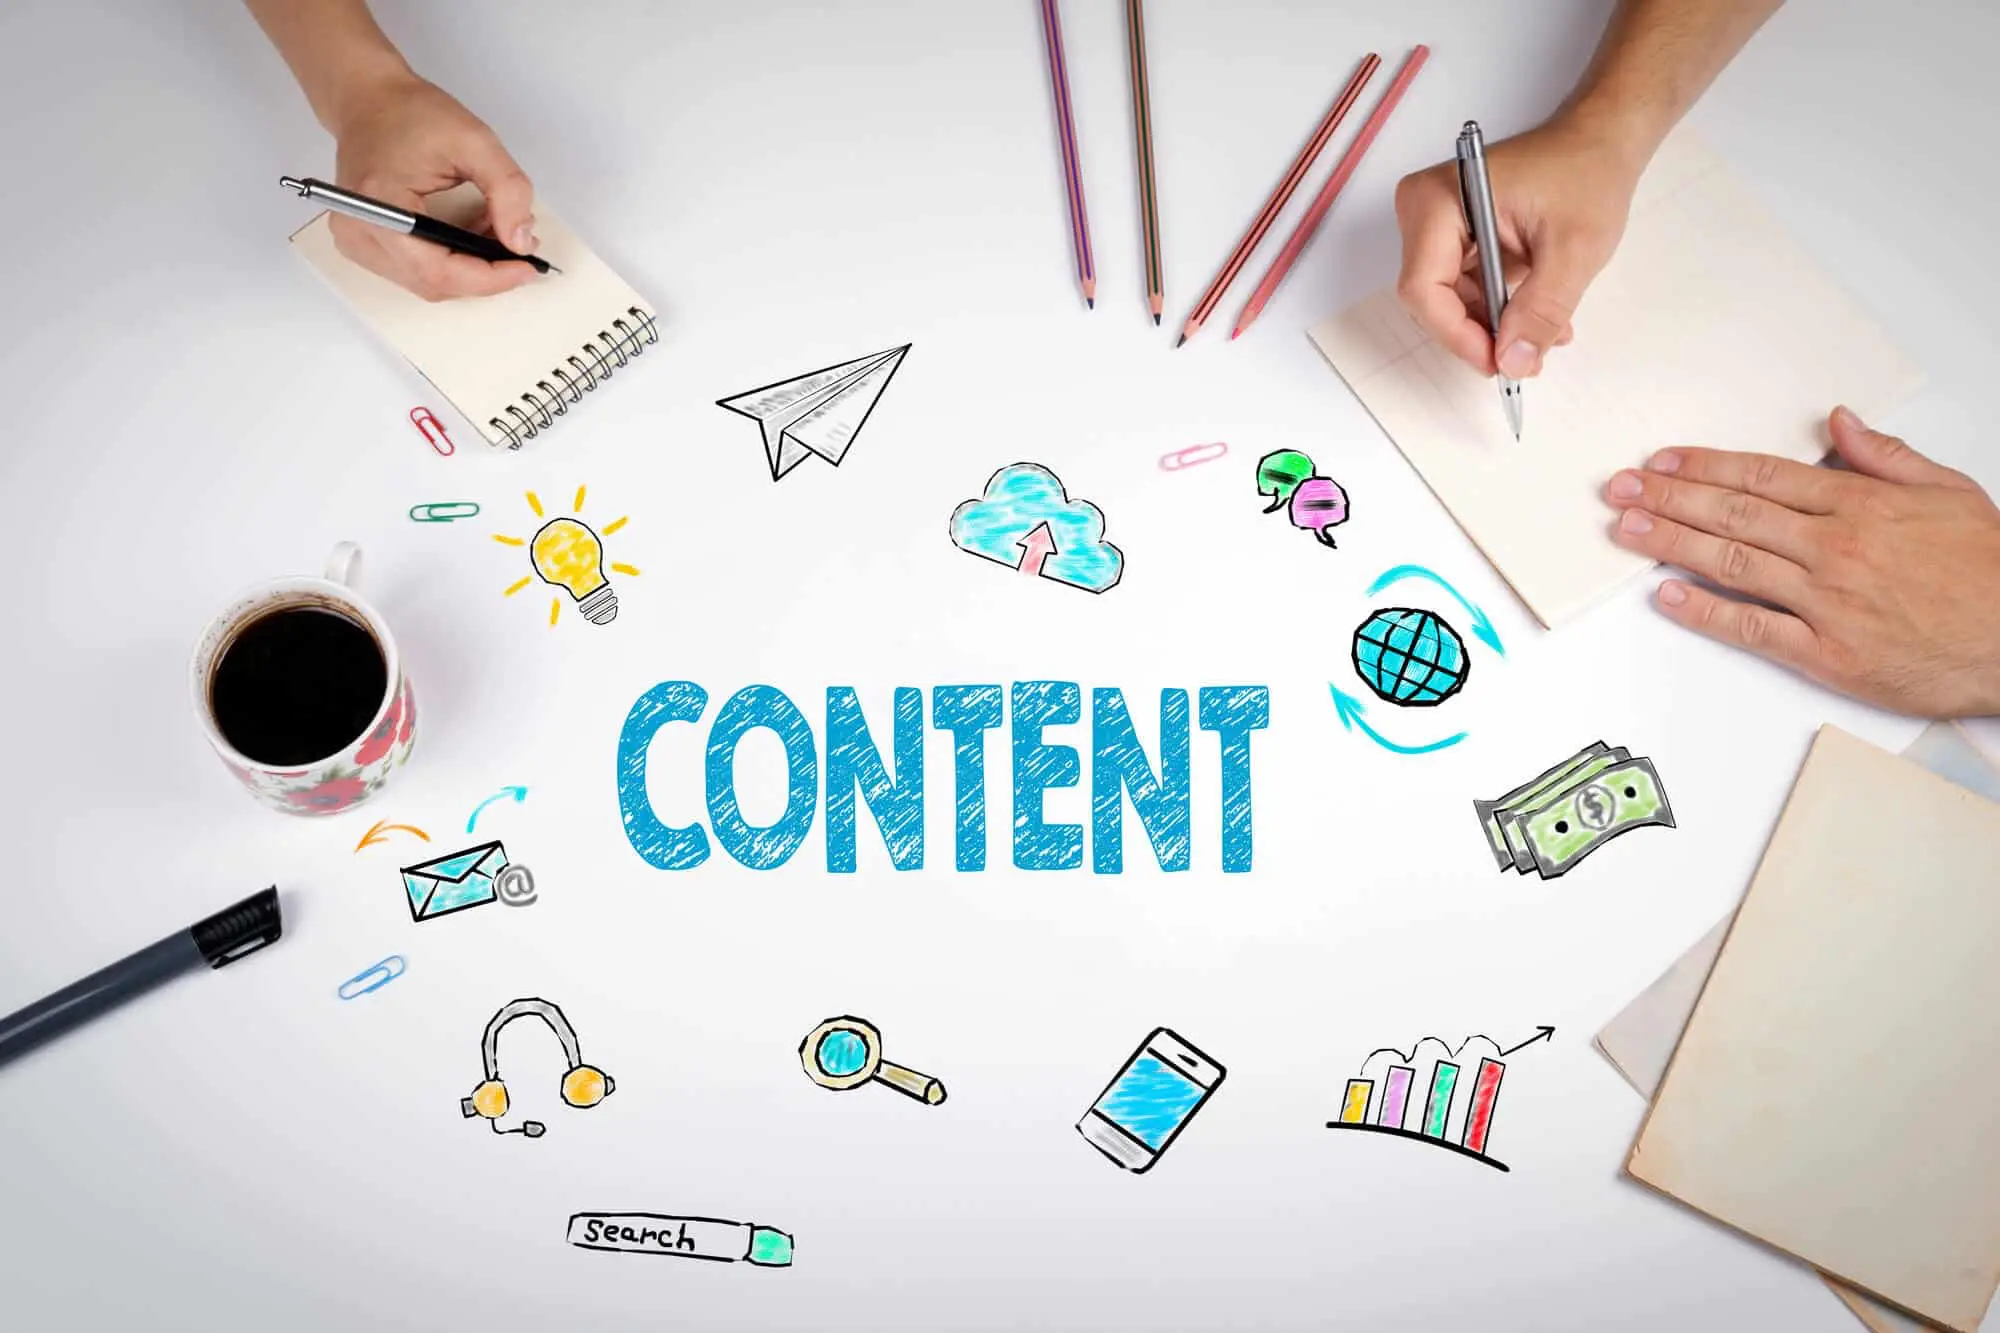 content-marketing-trends